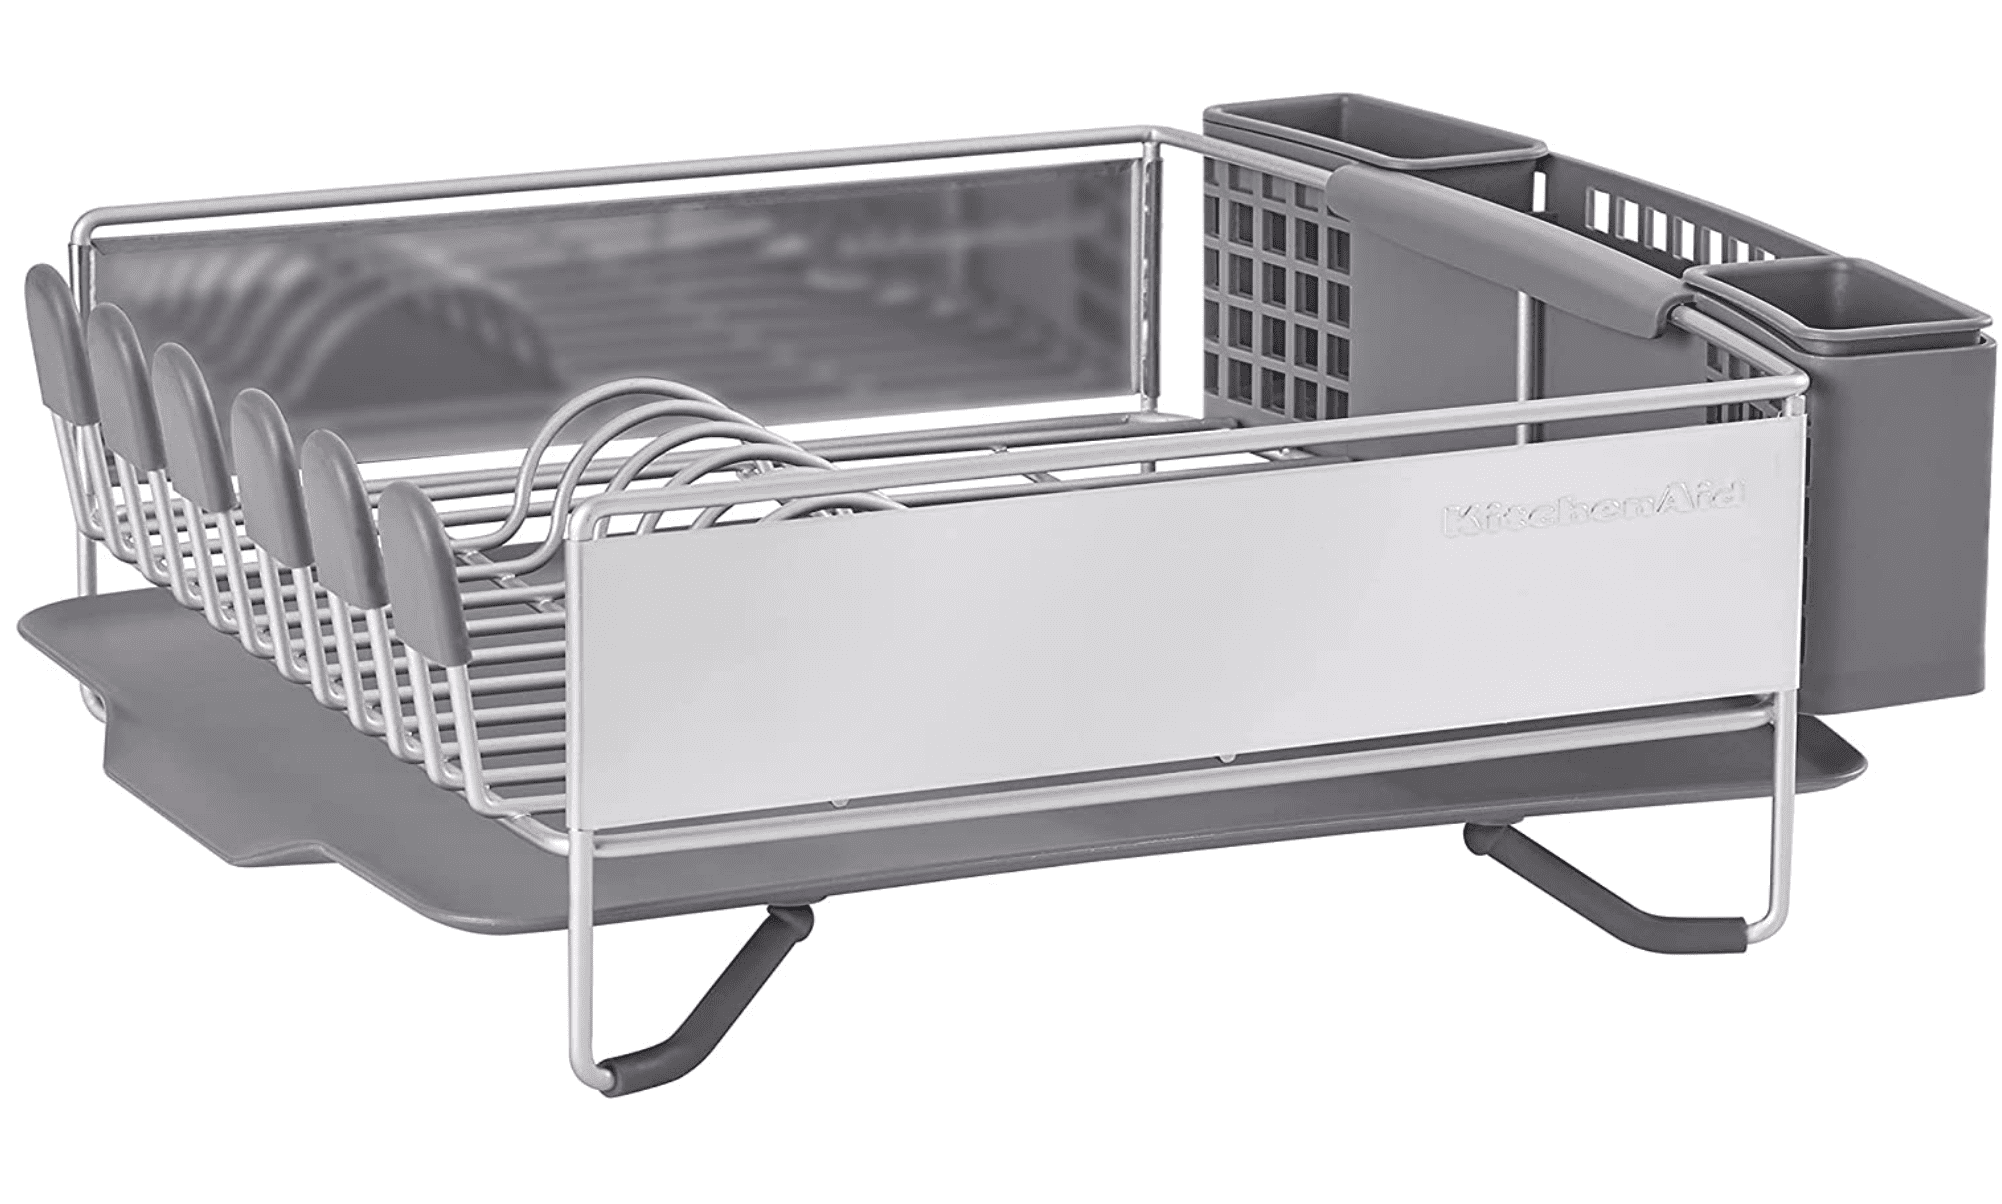 12 Best Plate Drying Rack for 2023